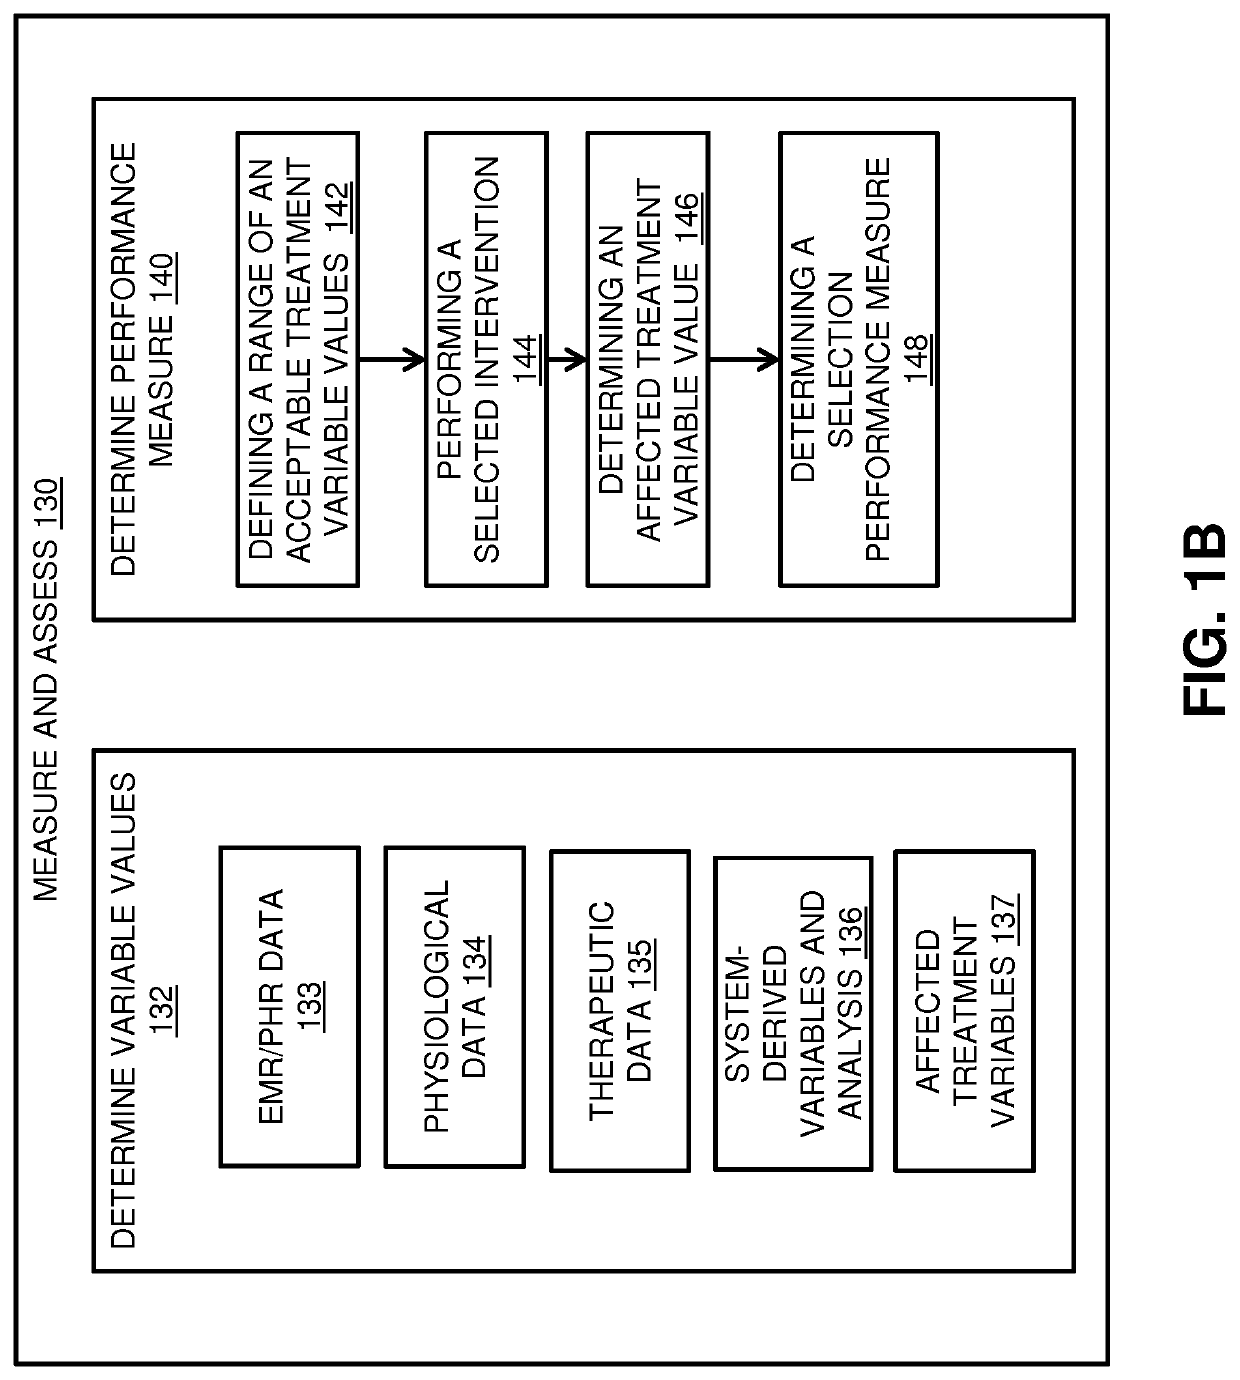 Clinical support systems and methods